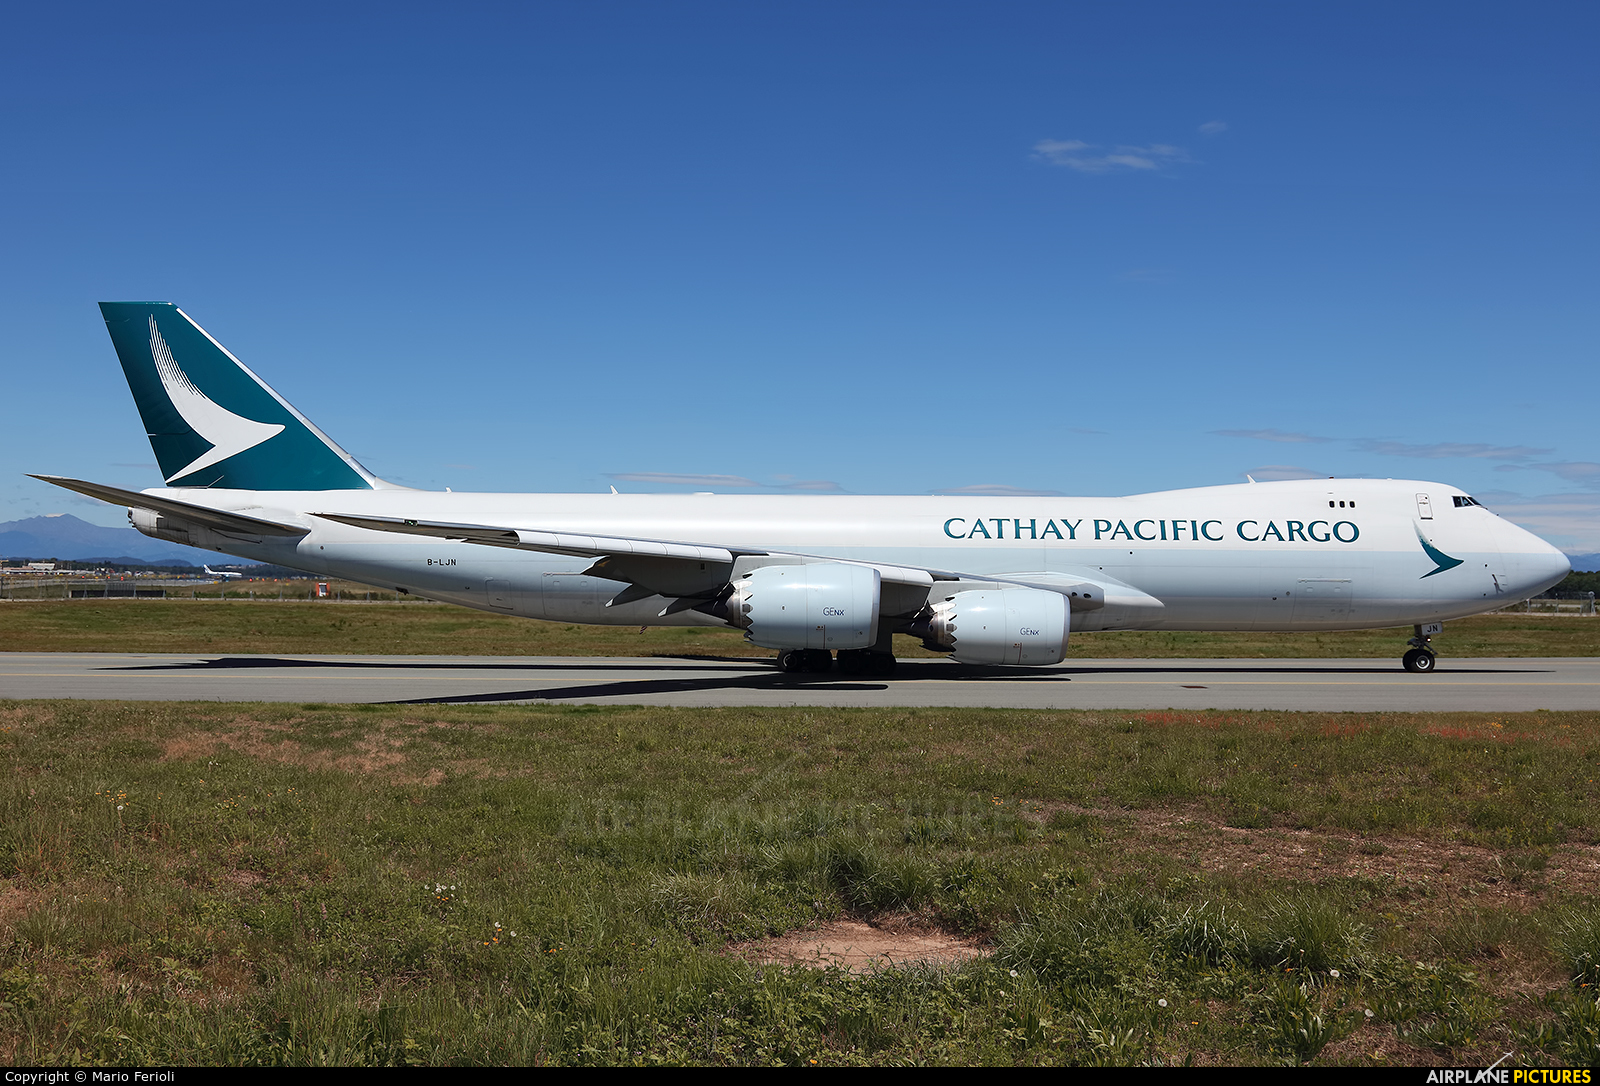 B-LJN - Cathay Pacific Cargo Boeing 747-8F at Milan - Malpensa | Photo ID  948084 | Airplane-Pictures.net